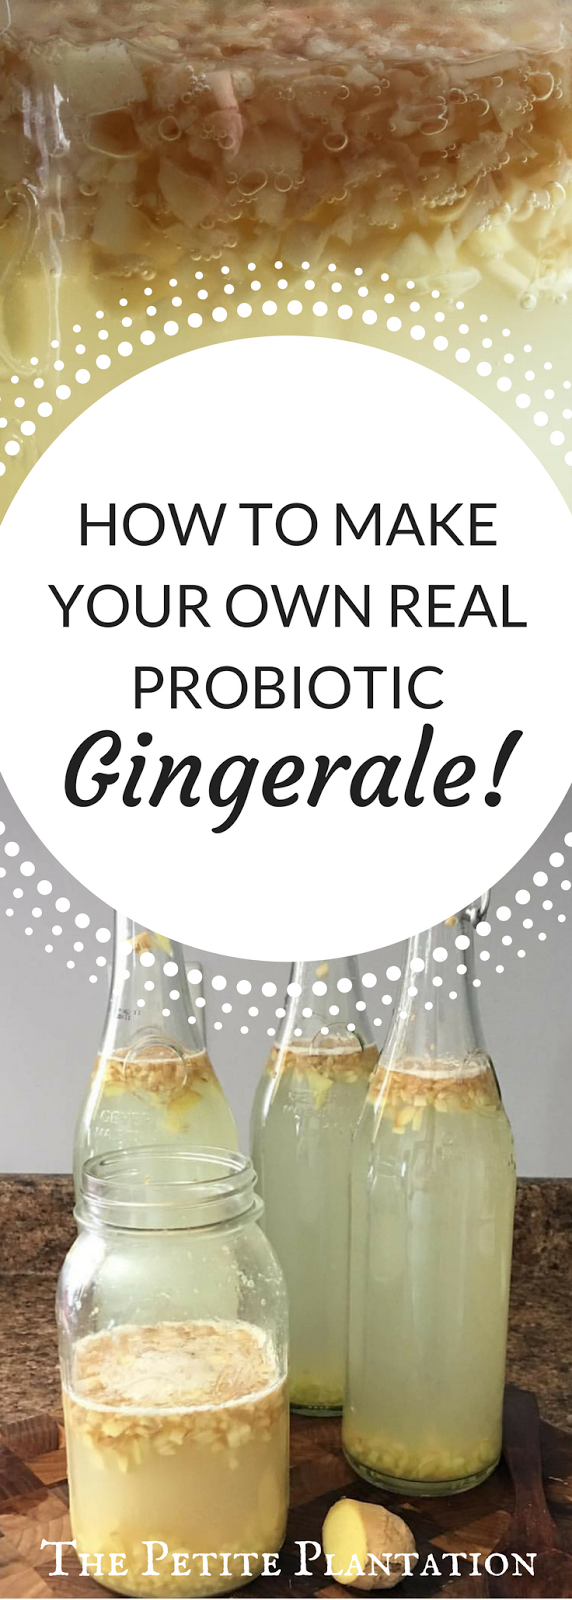 Make Your Own Ginger Ale - The Petite Plantation